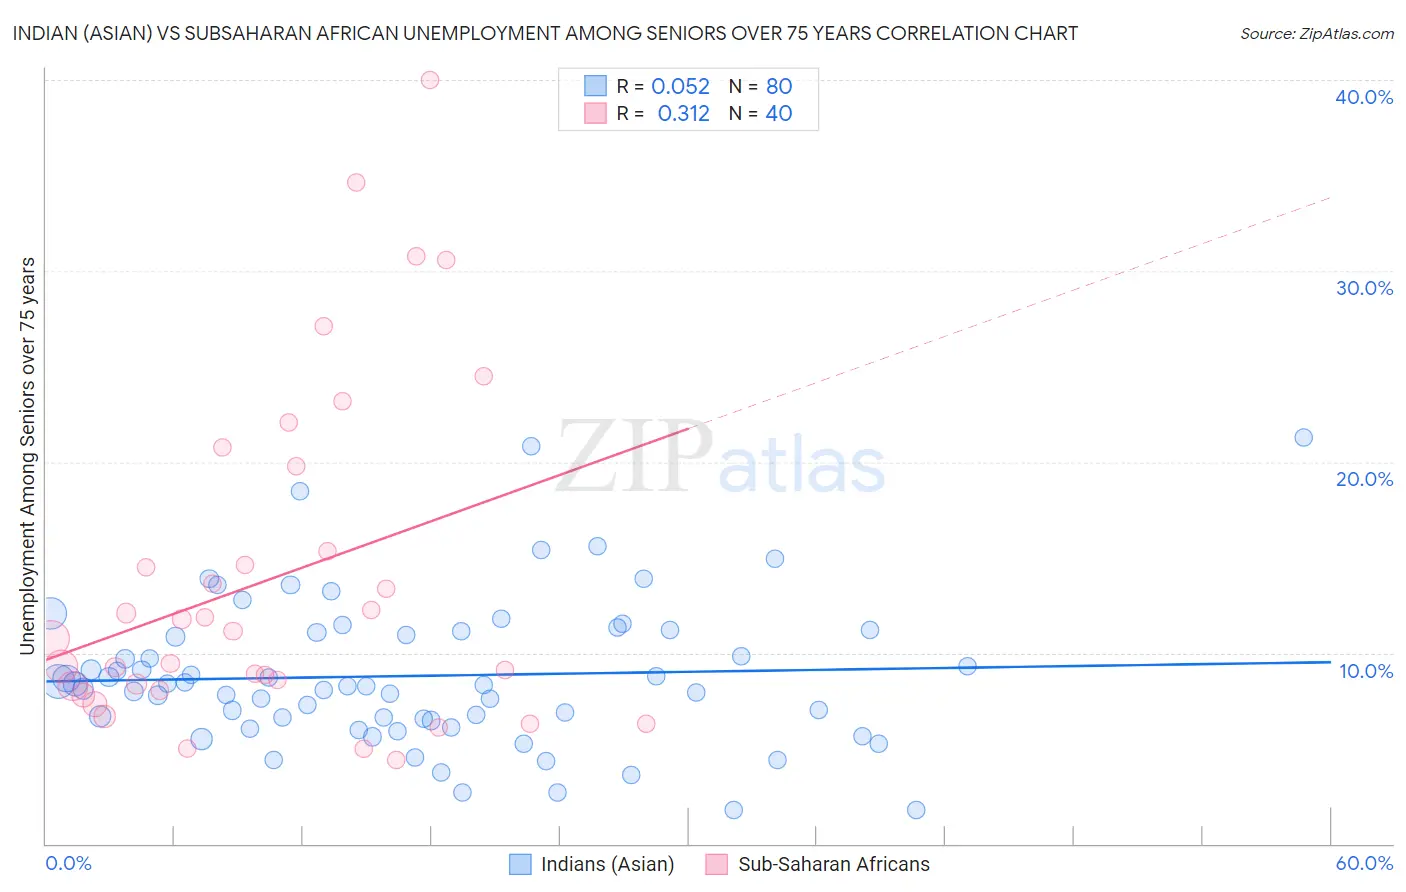 Indian (Asian) vs Subsaharan African Unemployment Among Seniors over 75 years